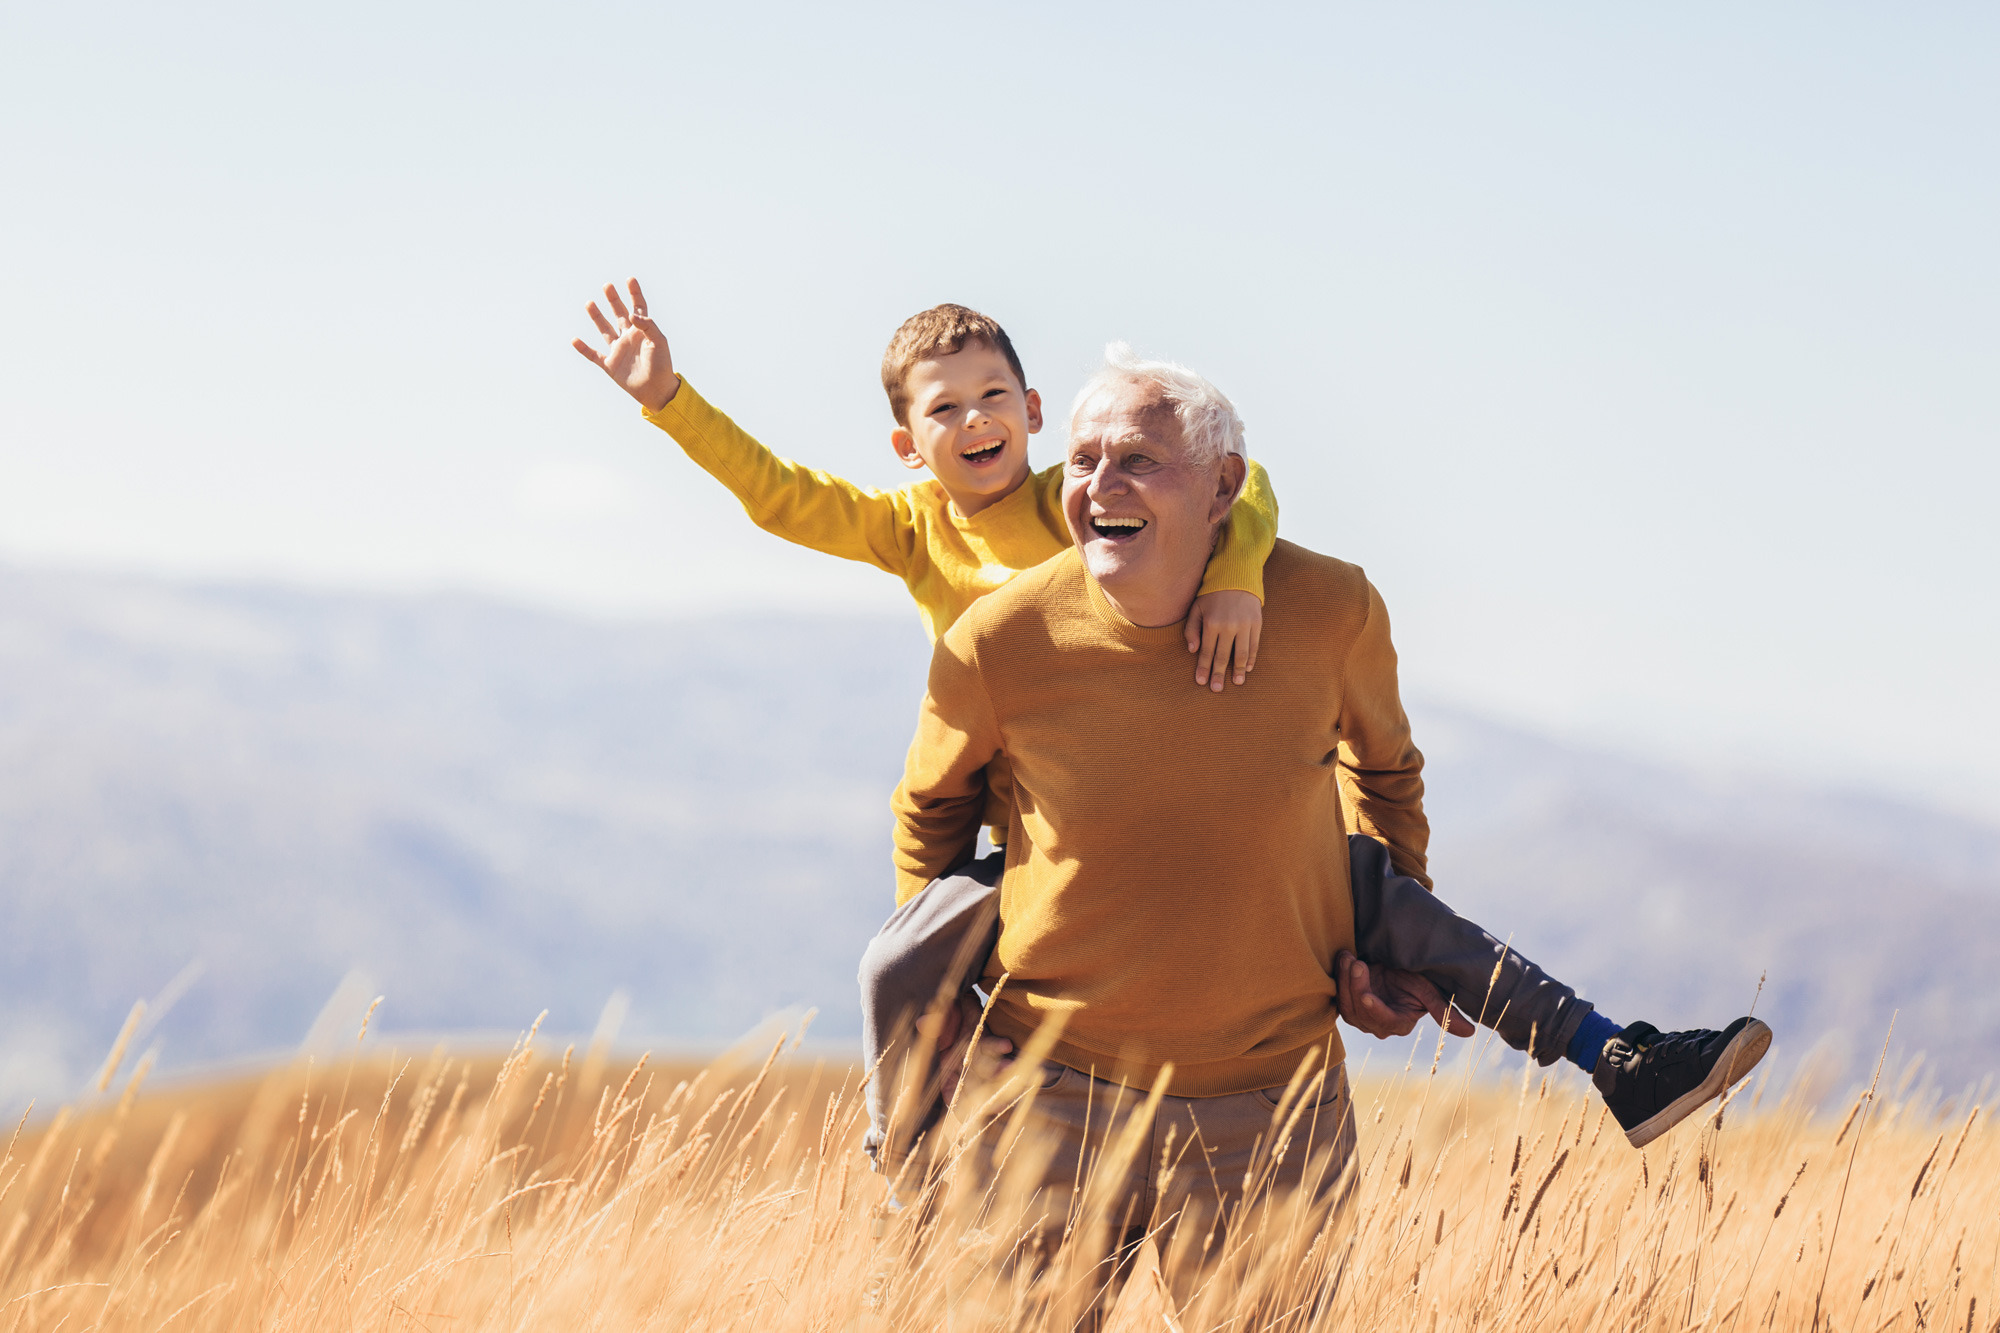 Grandfather giving a piggy back to his grandson in the long grass, both with huge grins. Aster Care's Dementia Care Policy takes into consideration the individuality of the person and recognises the need to involve the family members or key people in the cared-for person’s life,